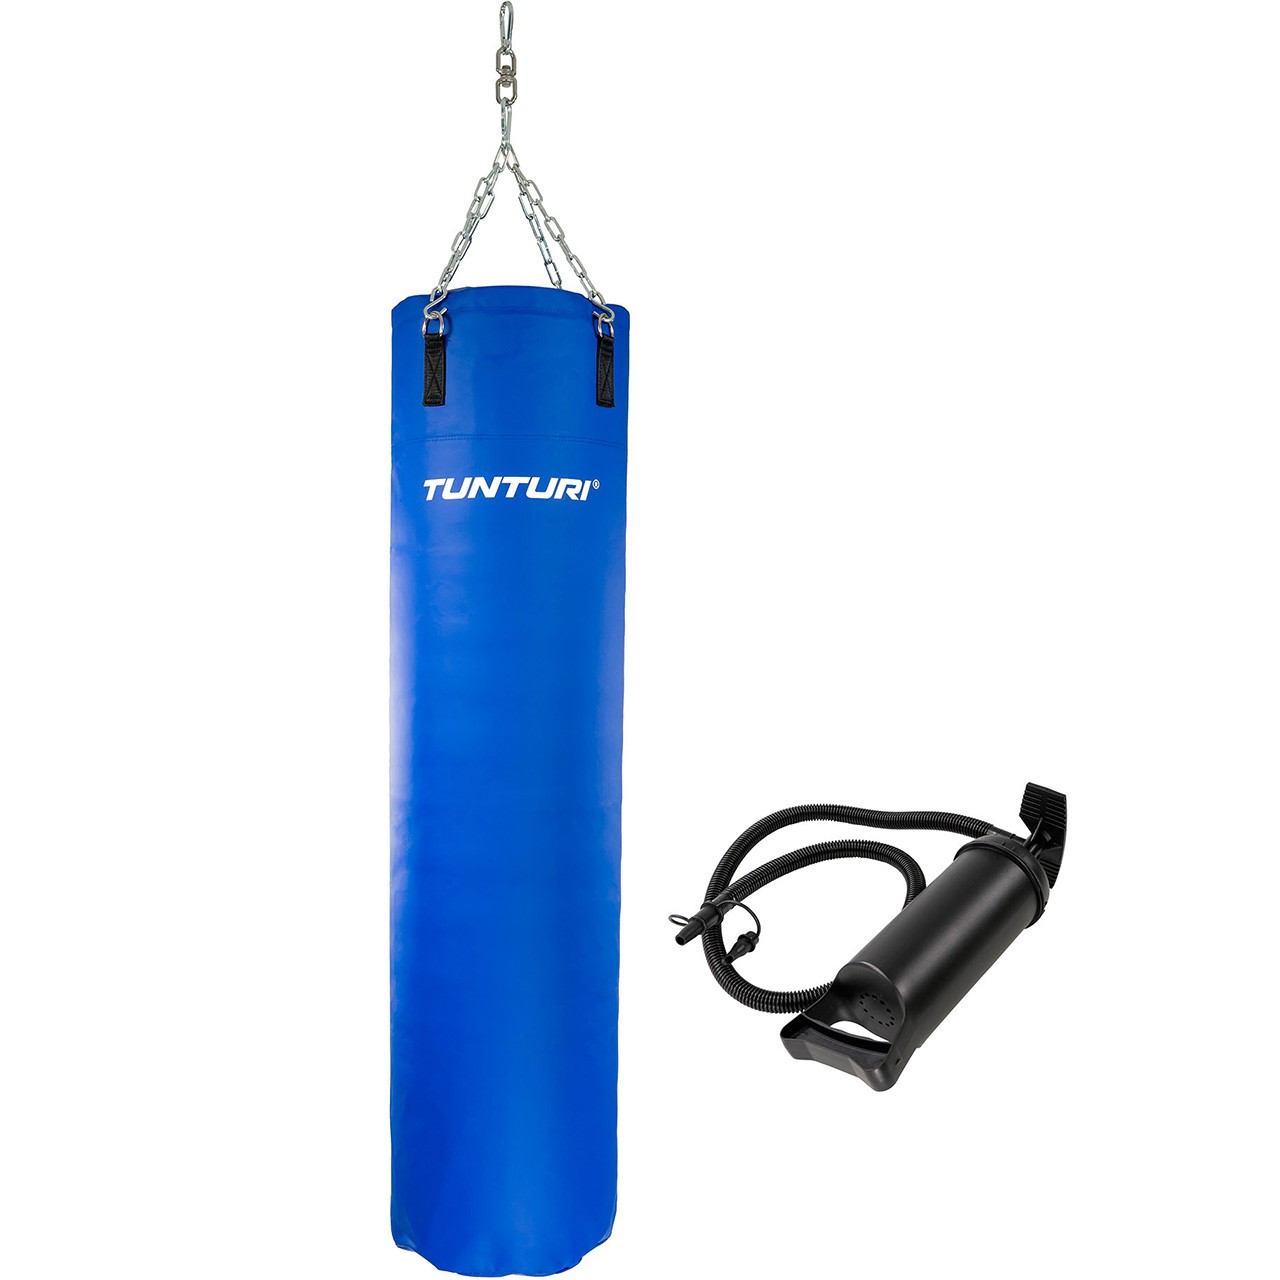 Buy Aqua Training Bag 15 75 Pound Heavy Punching Bag Global Series x  Mexico Online at Low Prices in India  Amazonin